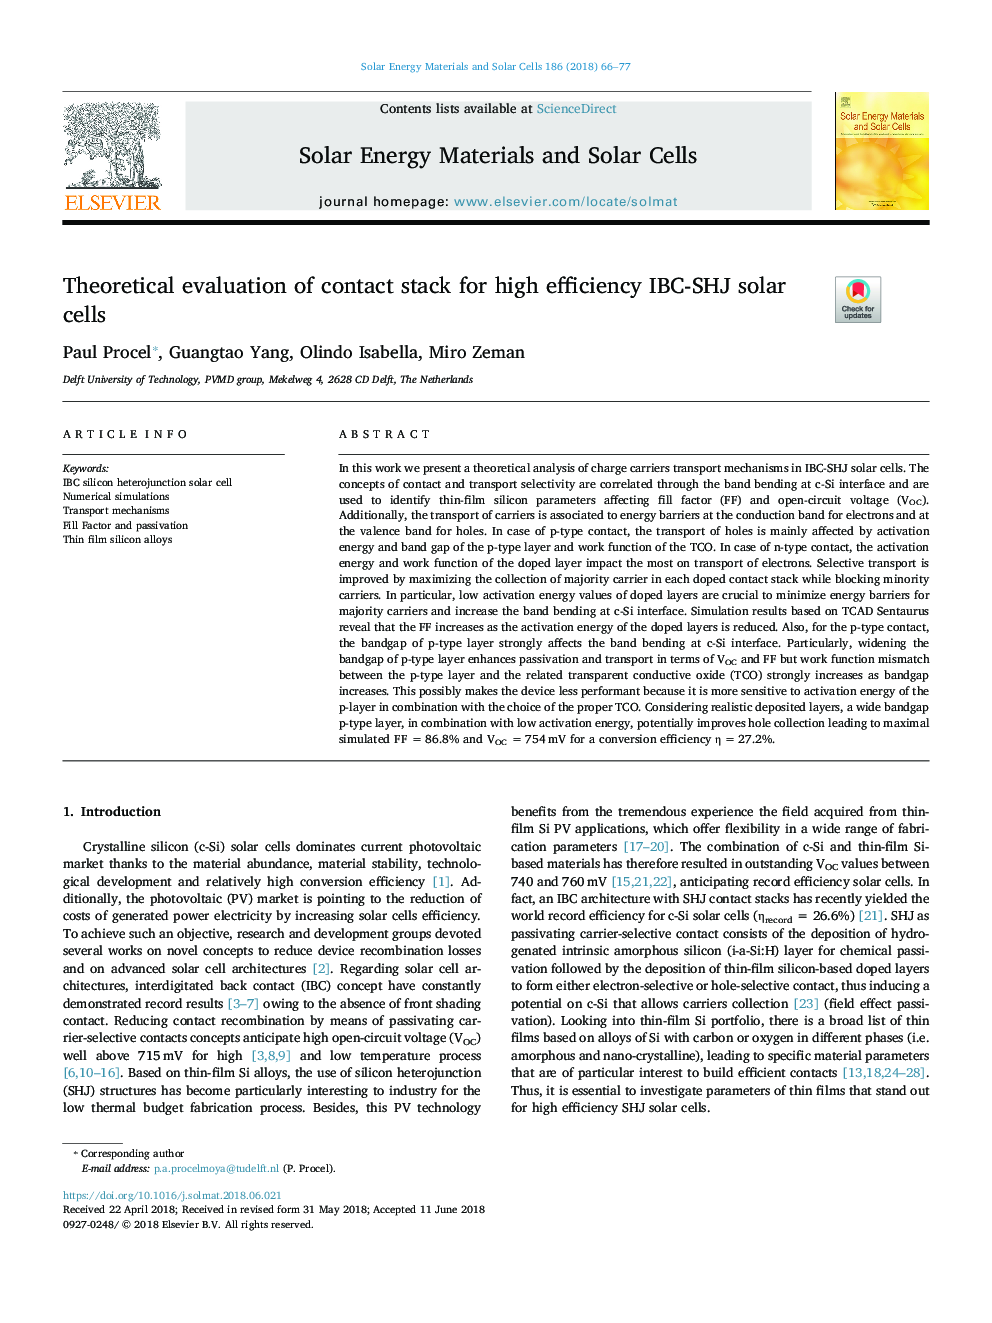 Theoretical evaluation of contact stack for high efficiency IBC-SHJ solar cells